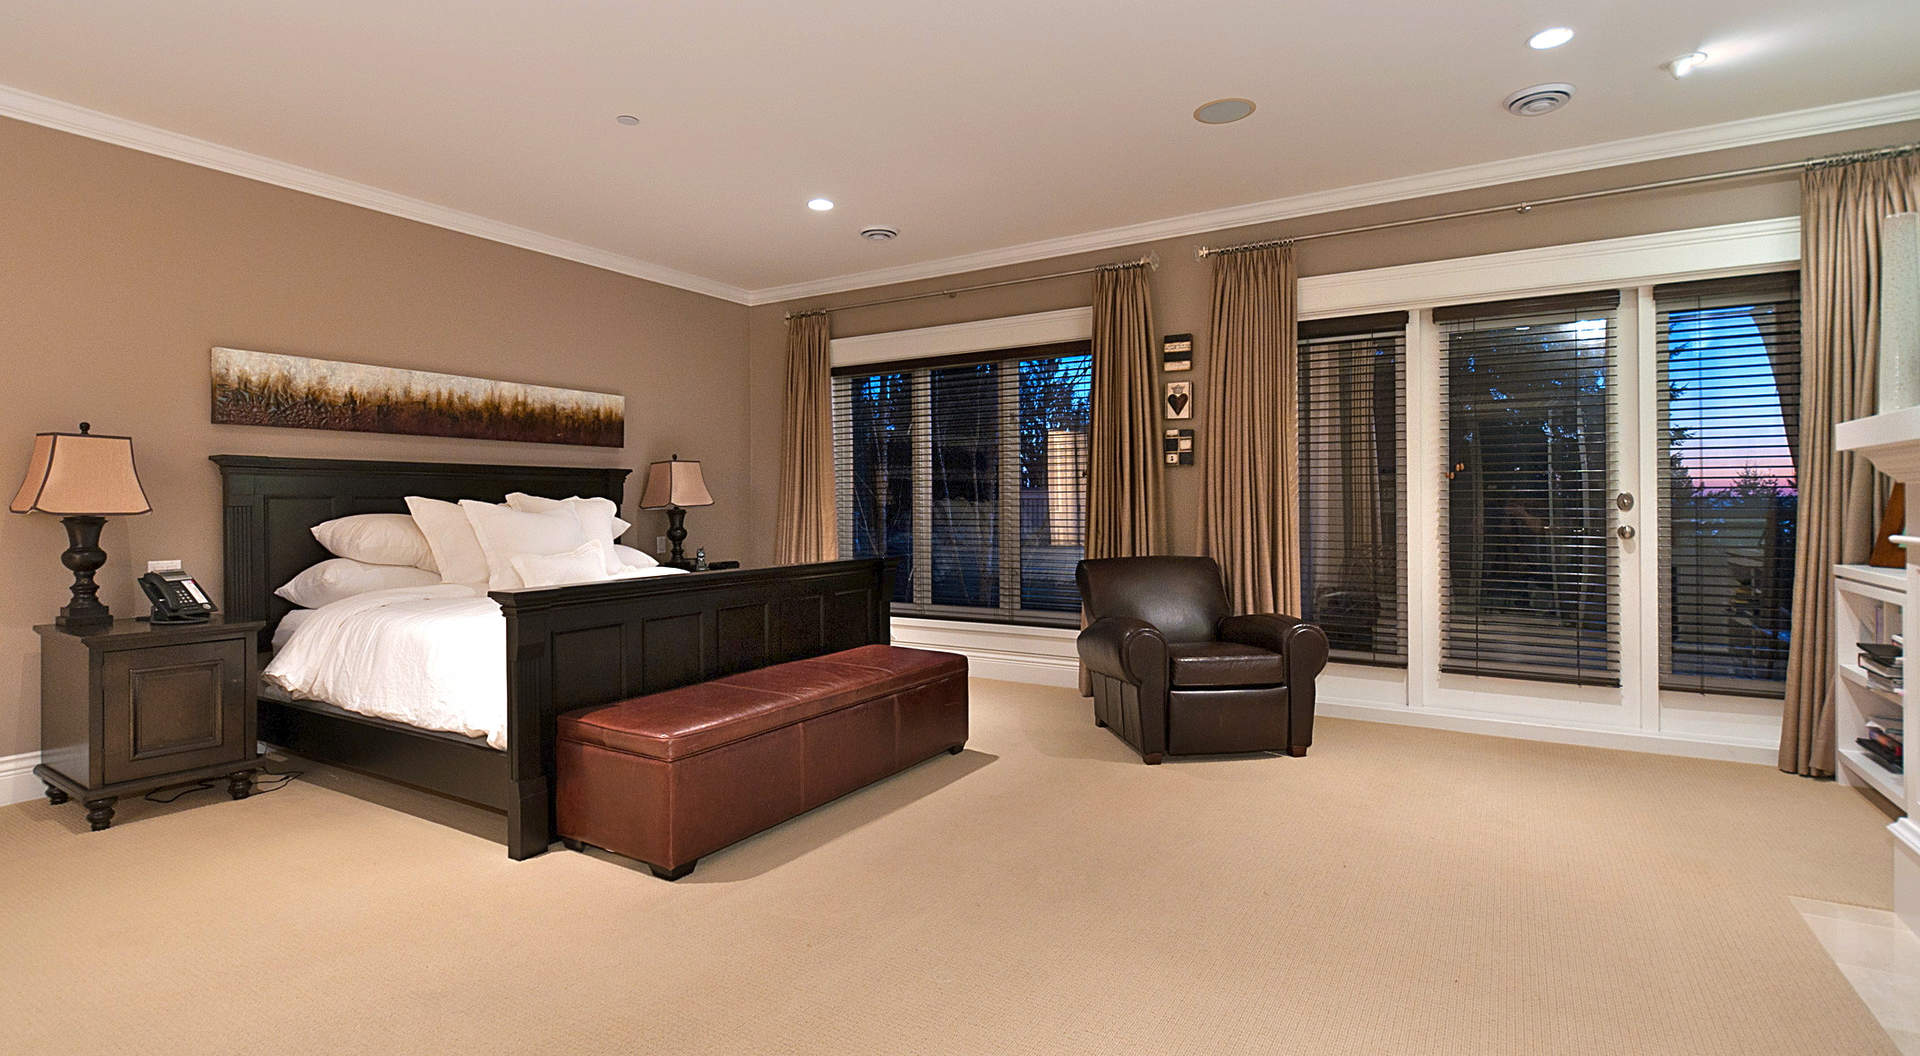 Spacious Master Bedroom with Separate Sitting Area